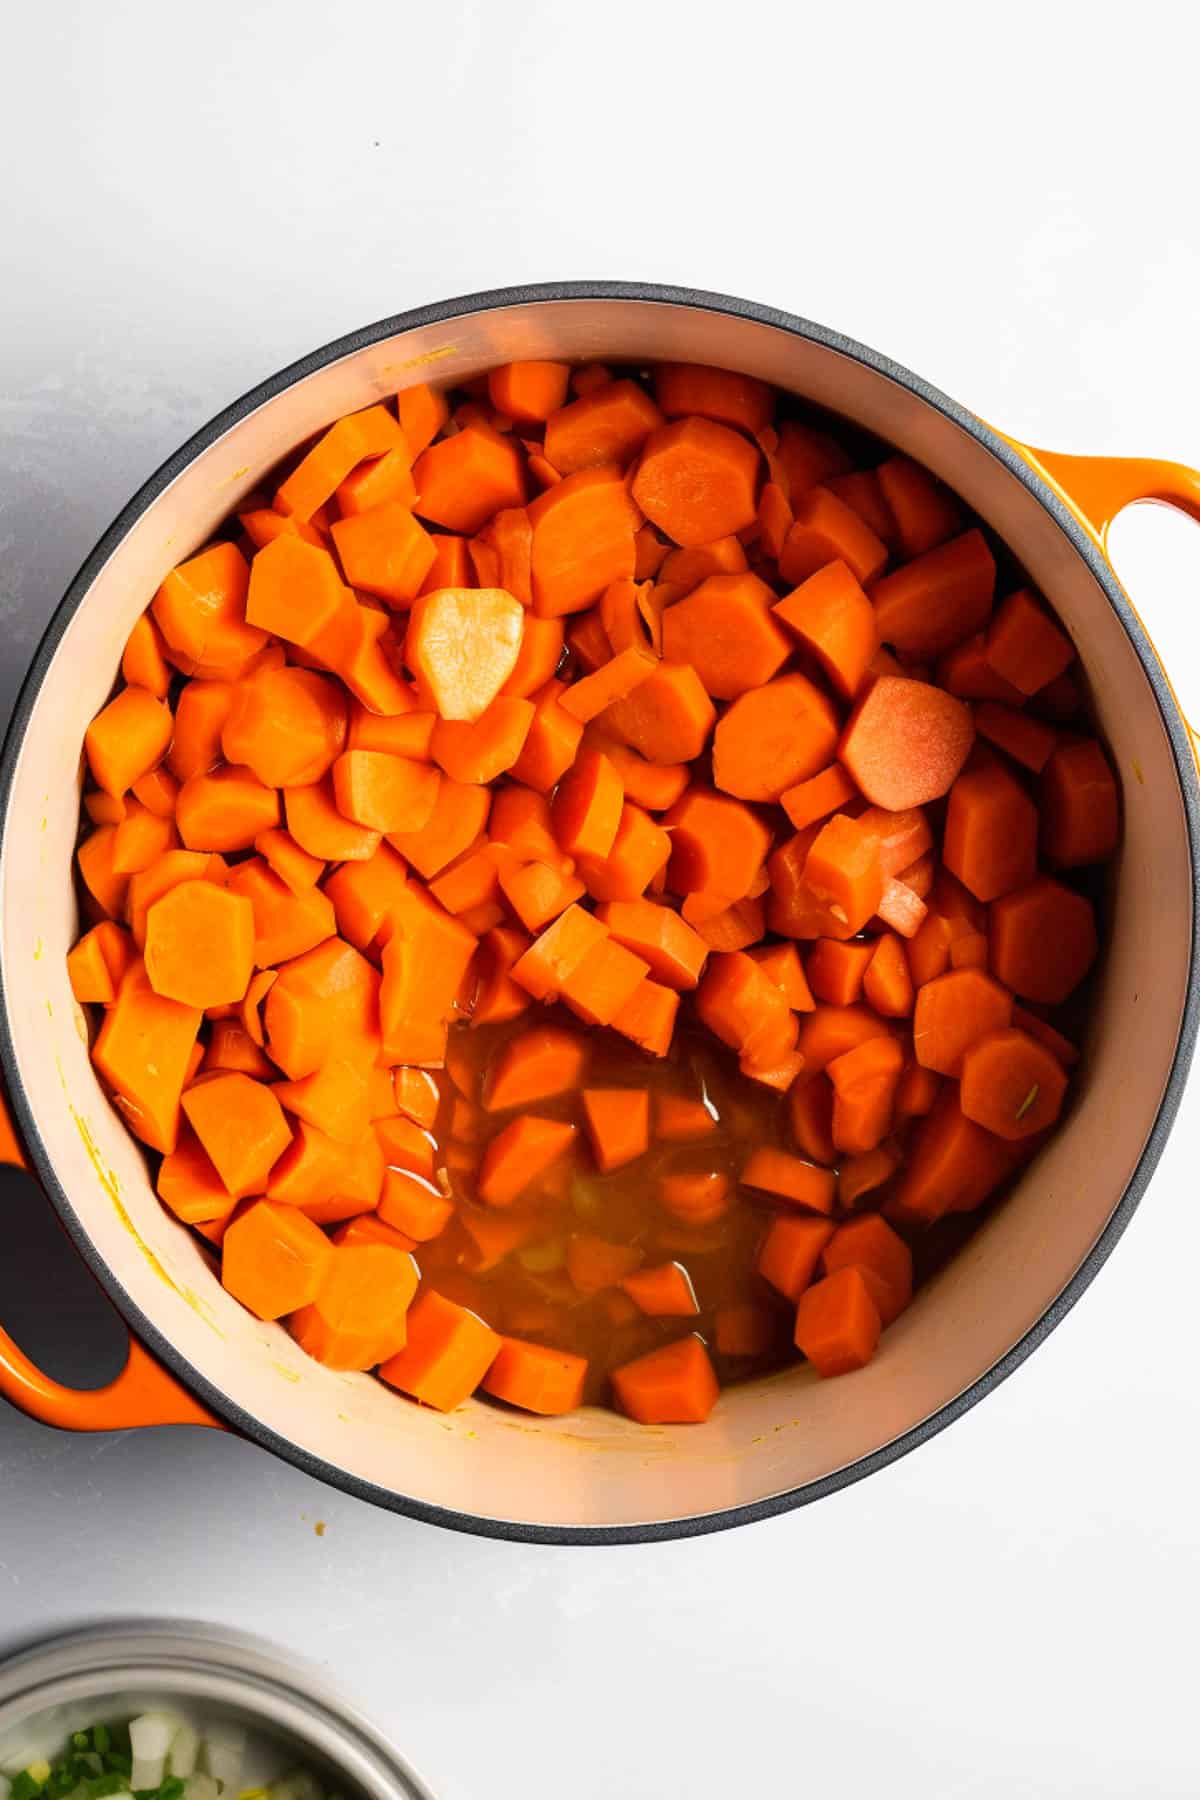 Chopped carrots in a pot with vegetable stock for carrot soup.